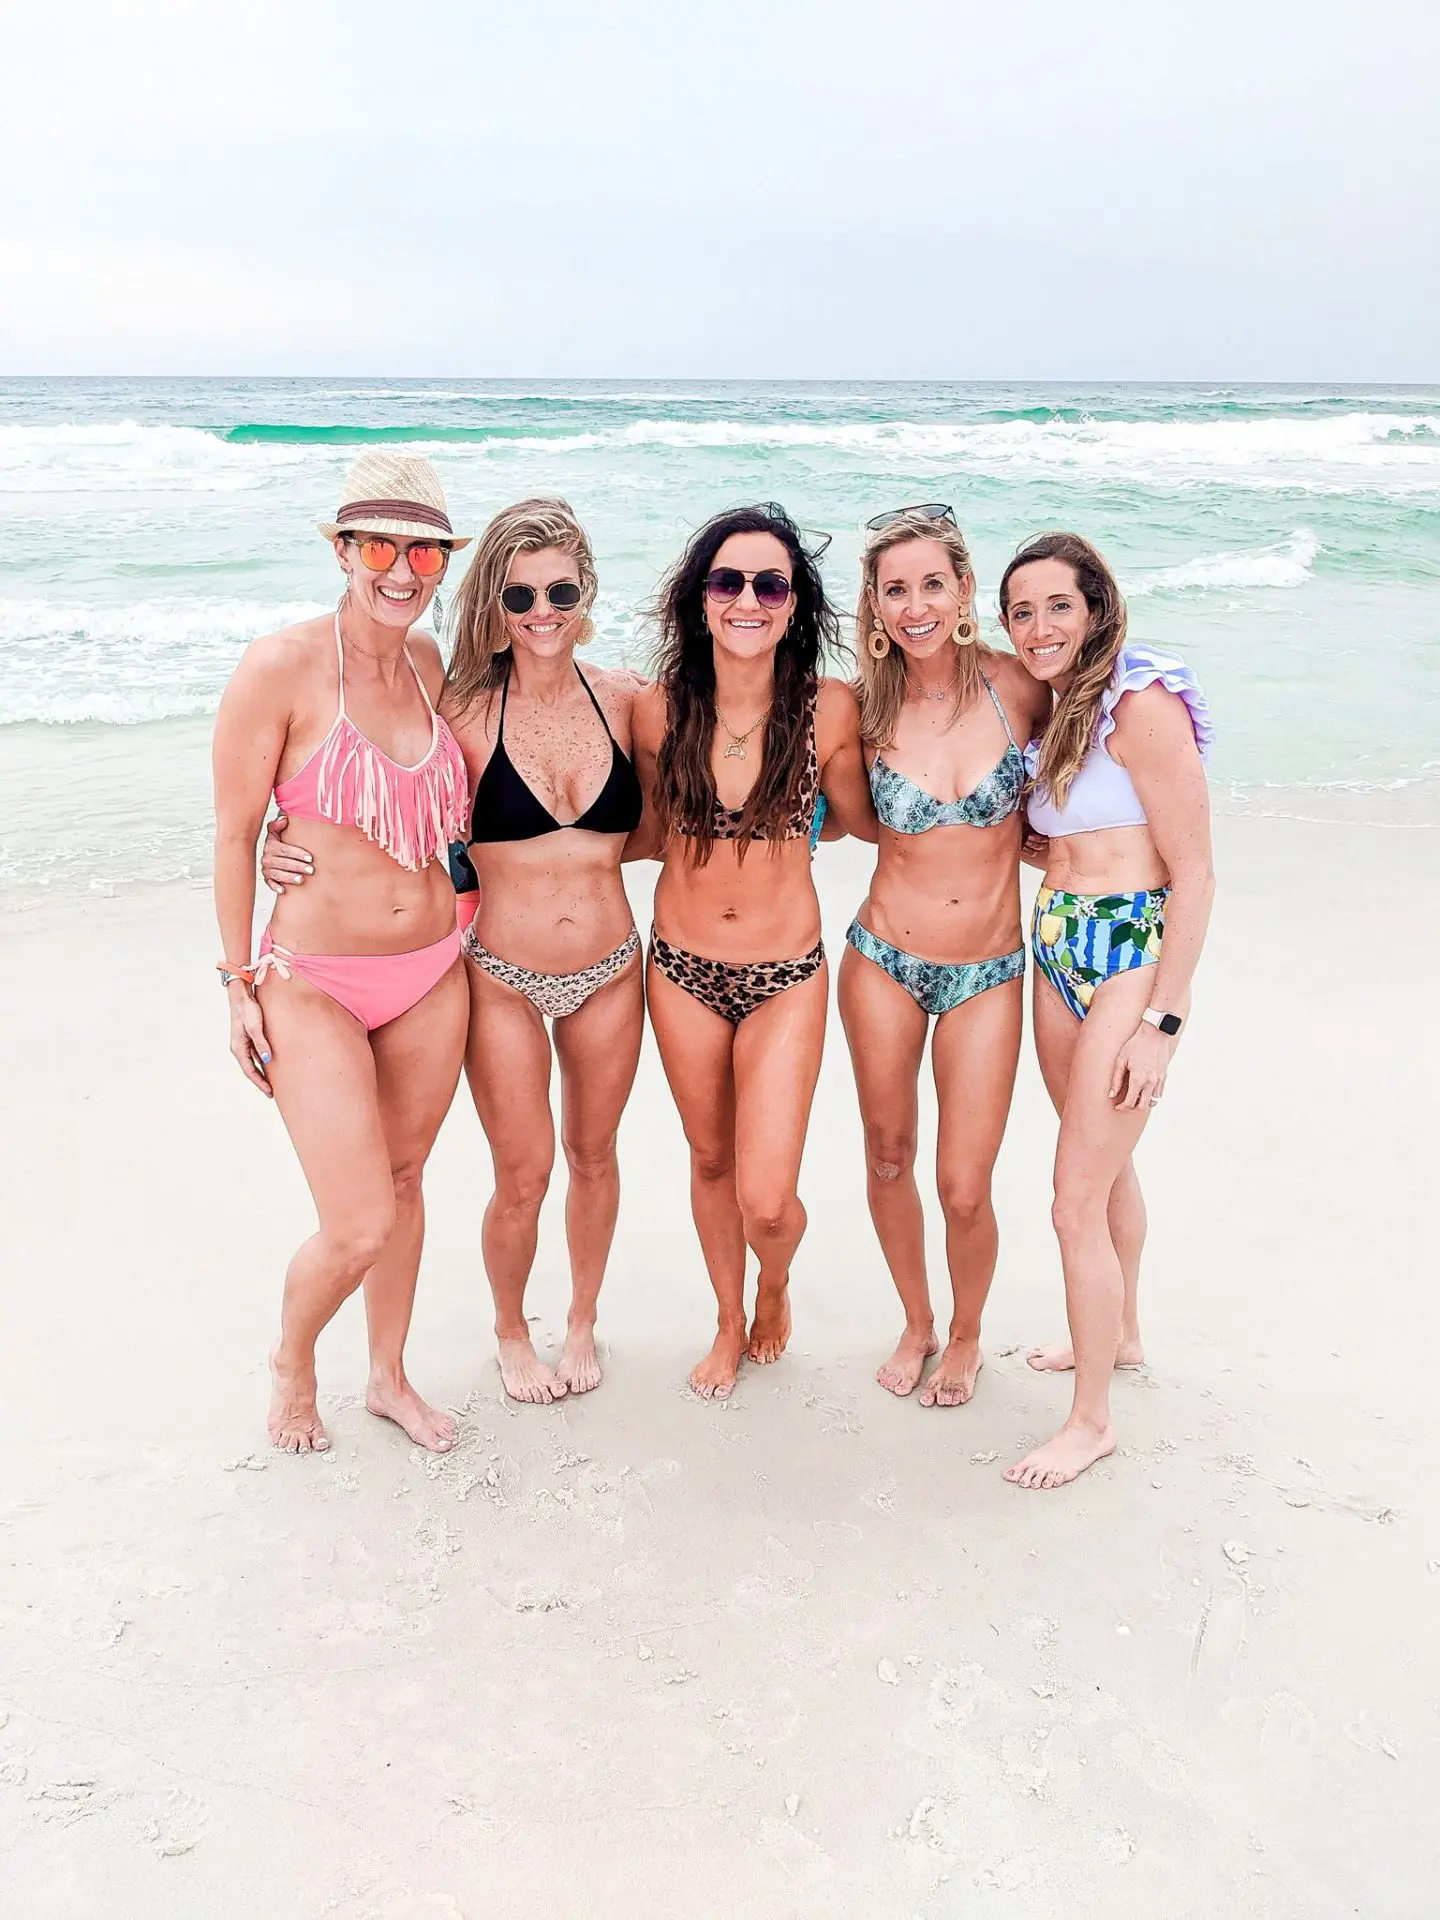 AL lifestyle blogger My Life Well Loved lets her husband shares the highlights of their recent Cancun trip. Find all the info here!